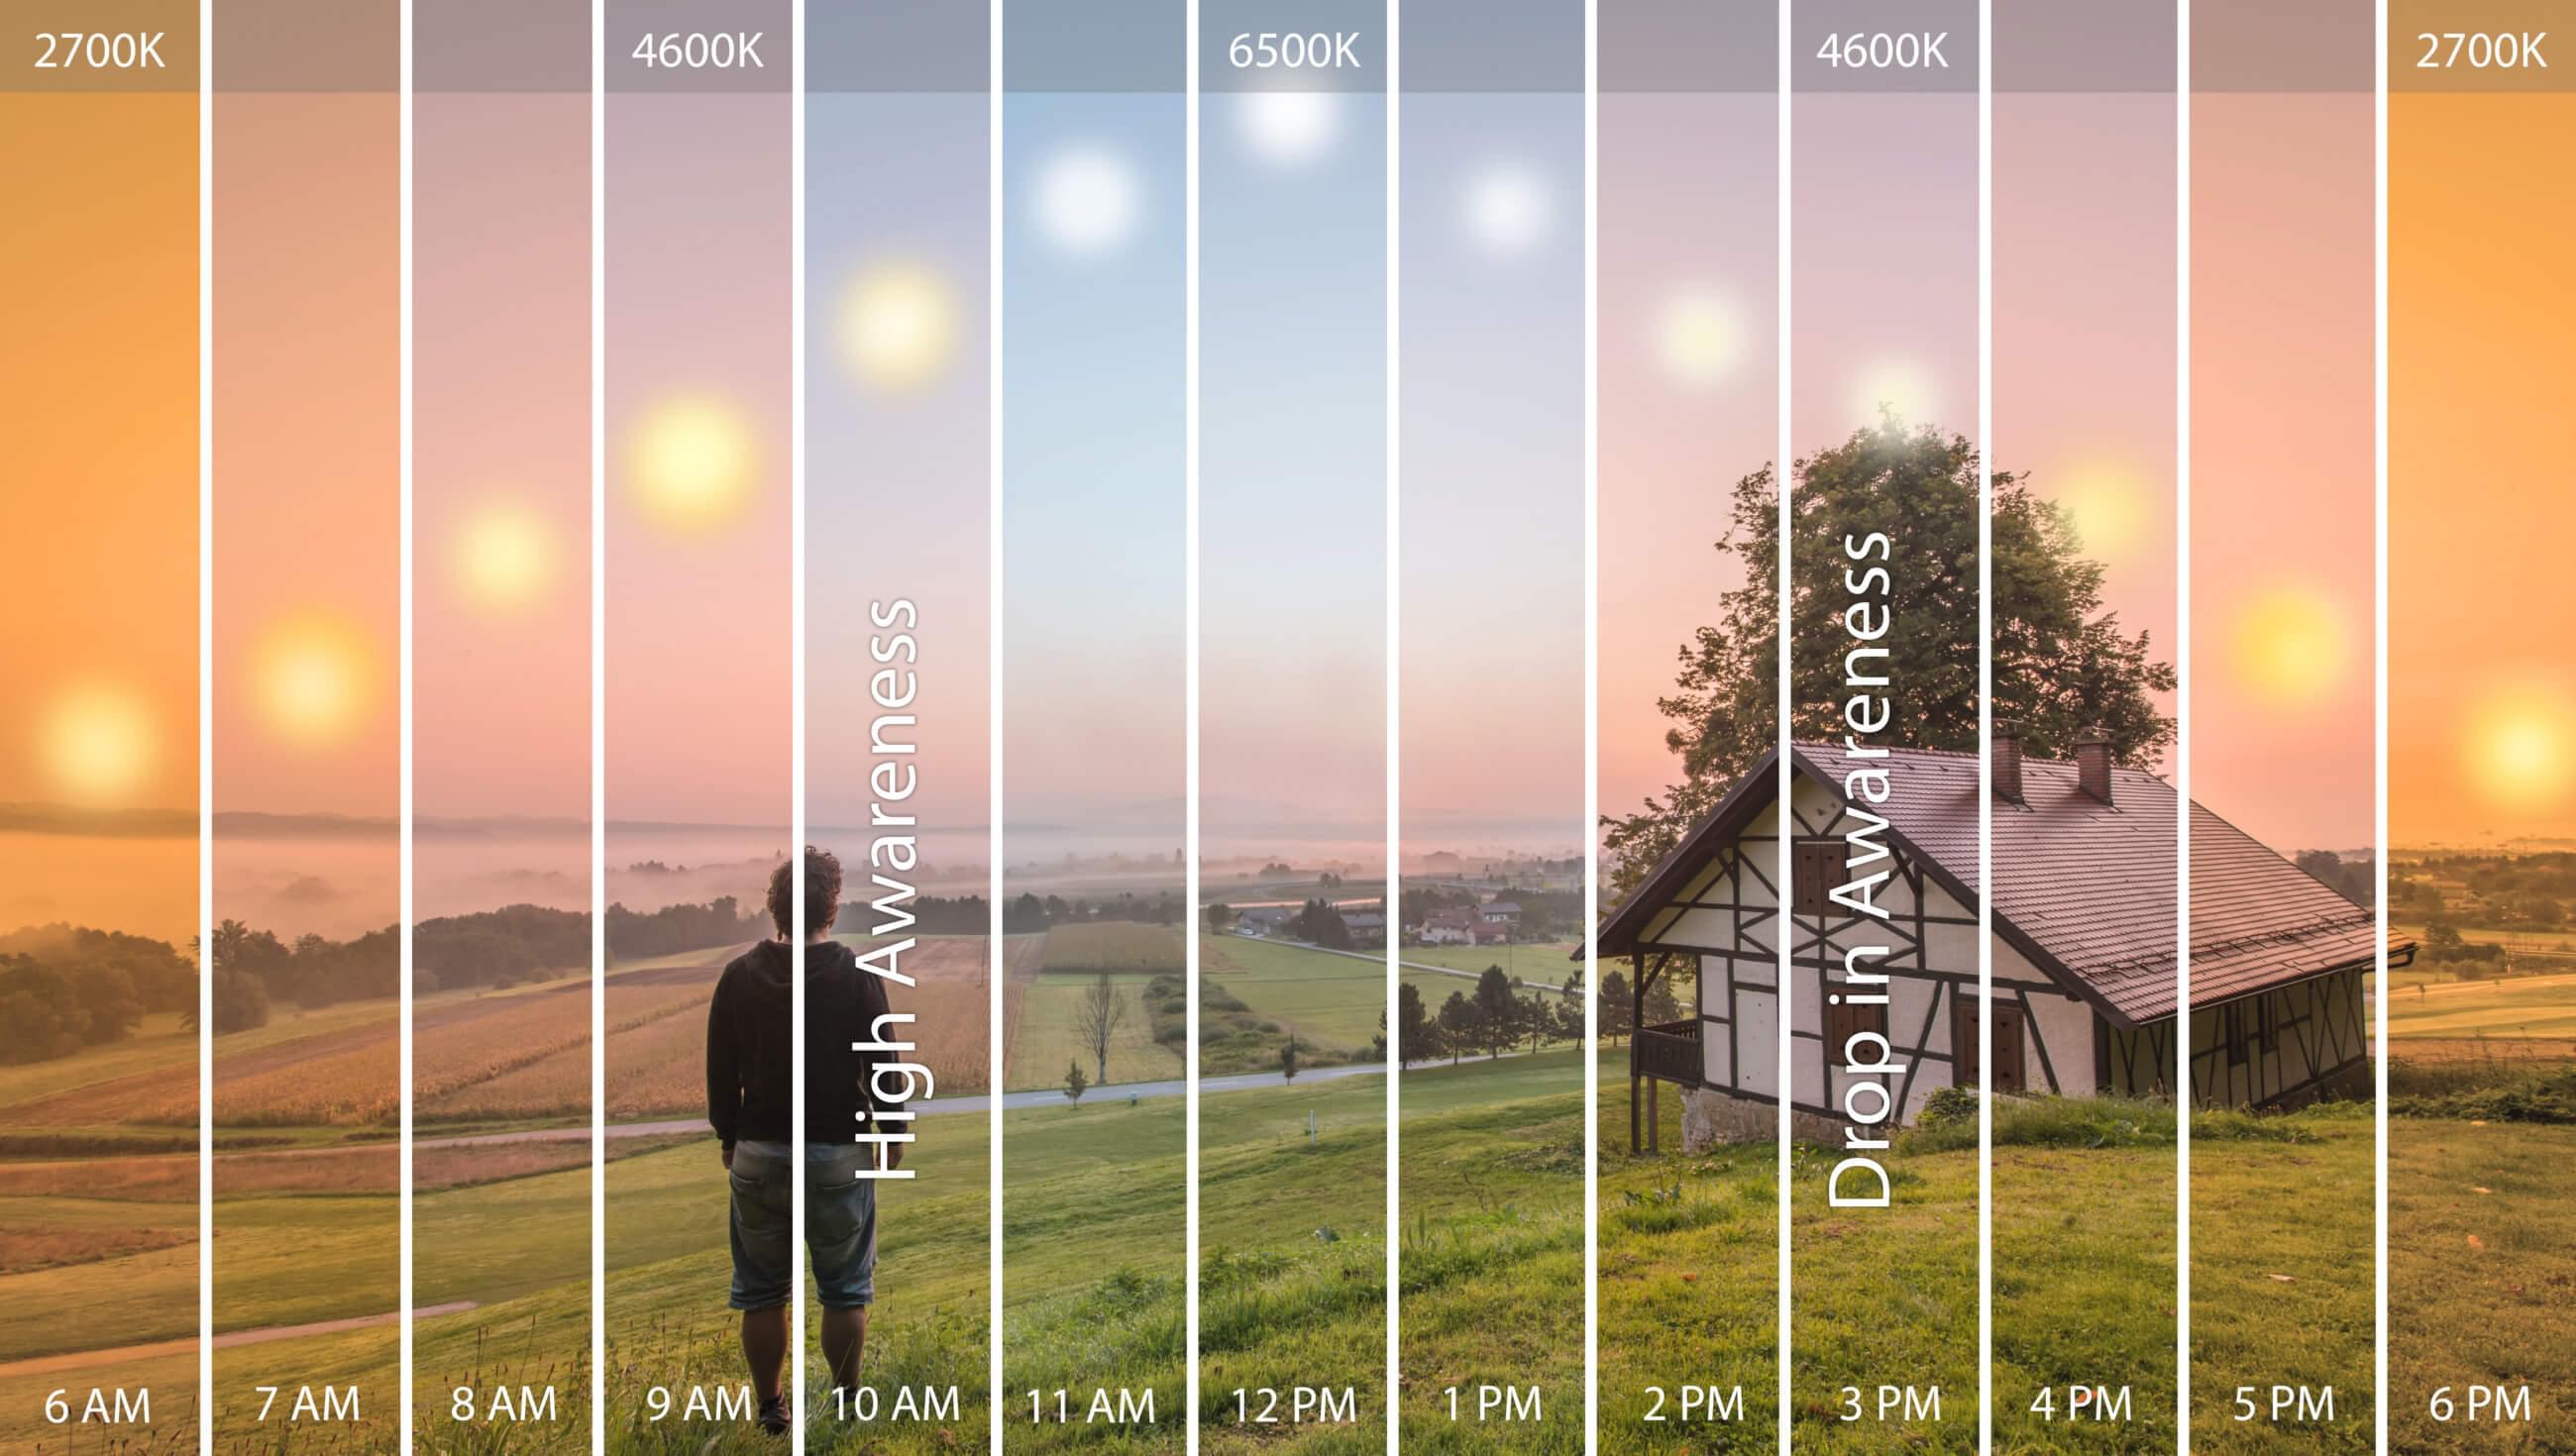 Circadian Lighting every hour of the day